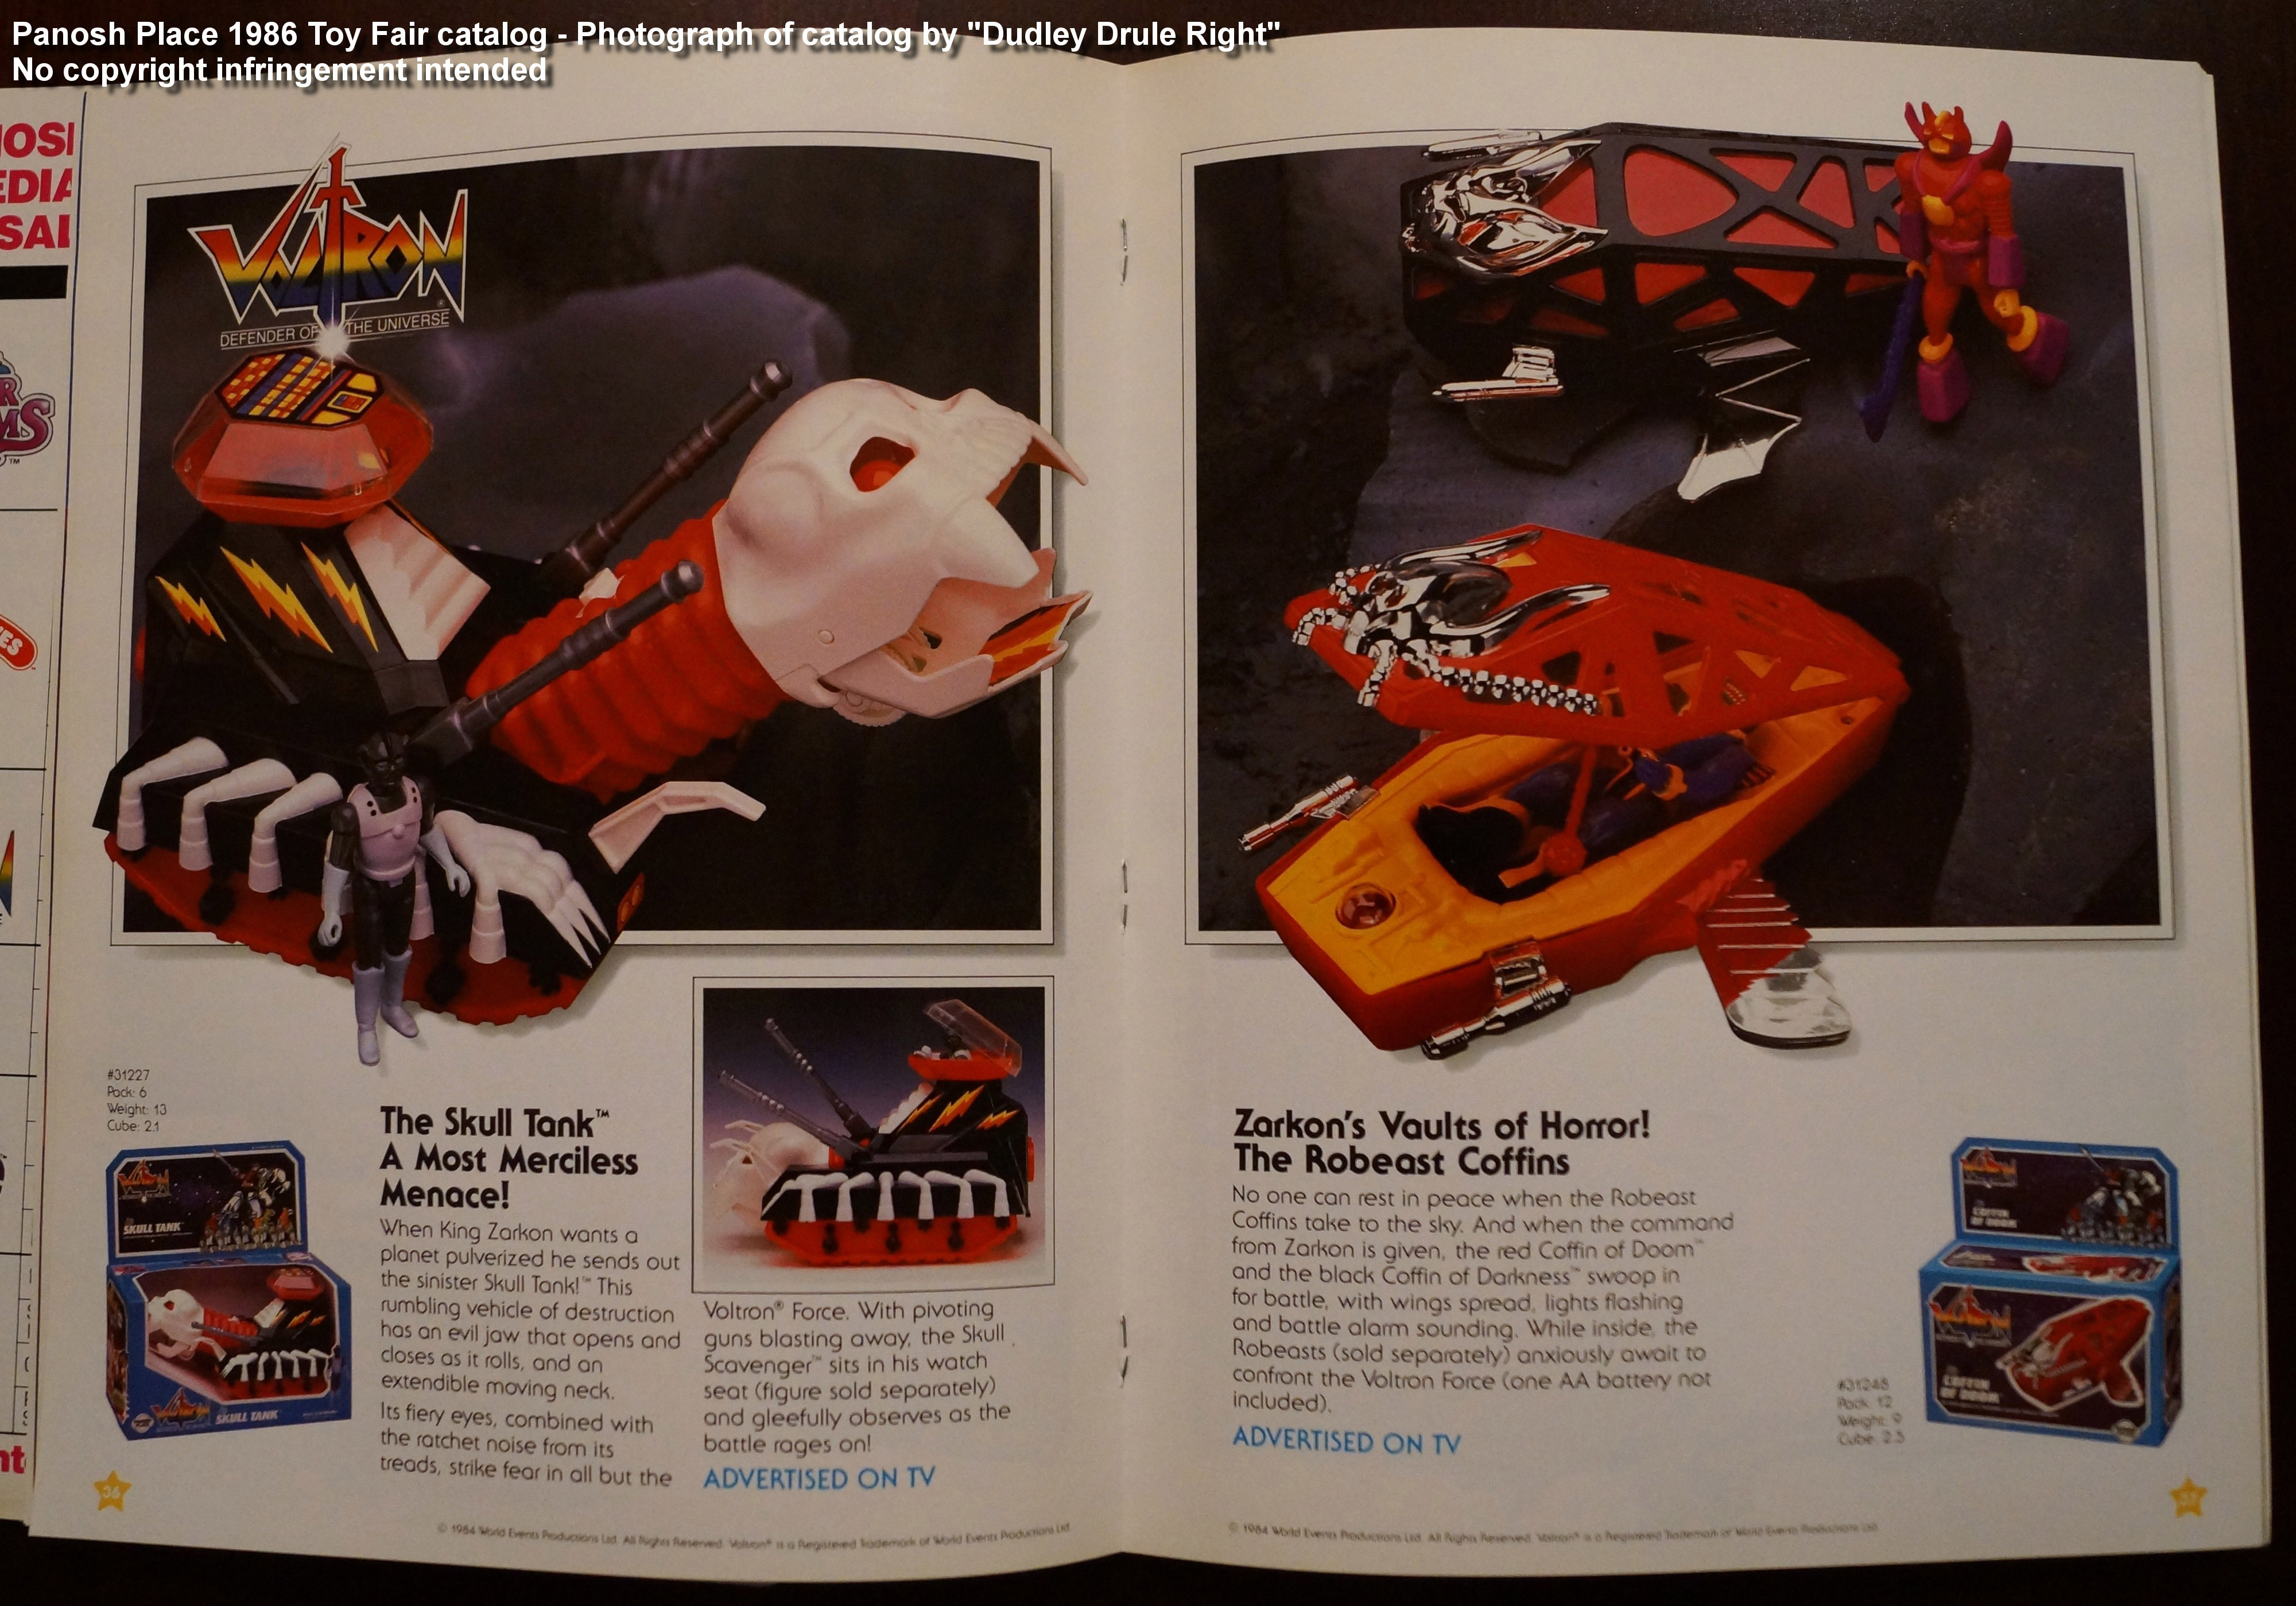 Panosh Place 1986 Toy Fair Catalog - Pages 36 and 37 (Voltron Skull Tank, Robeast Coffins)